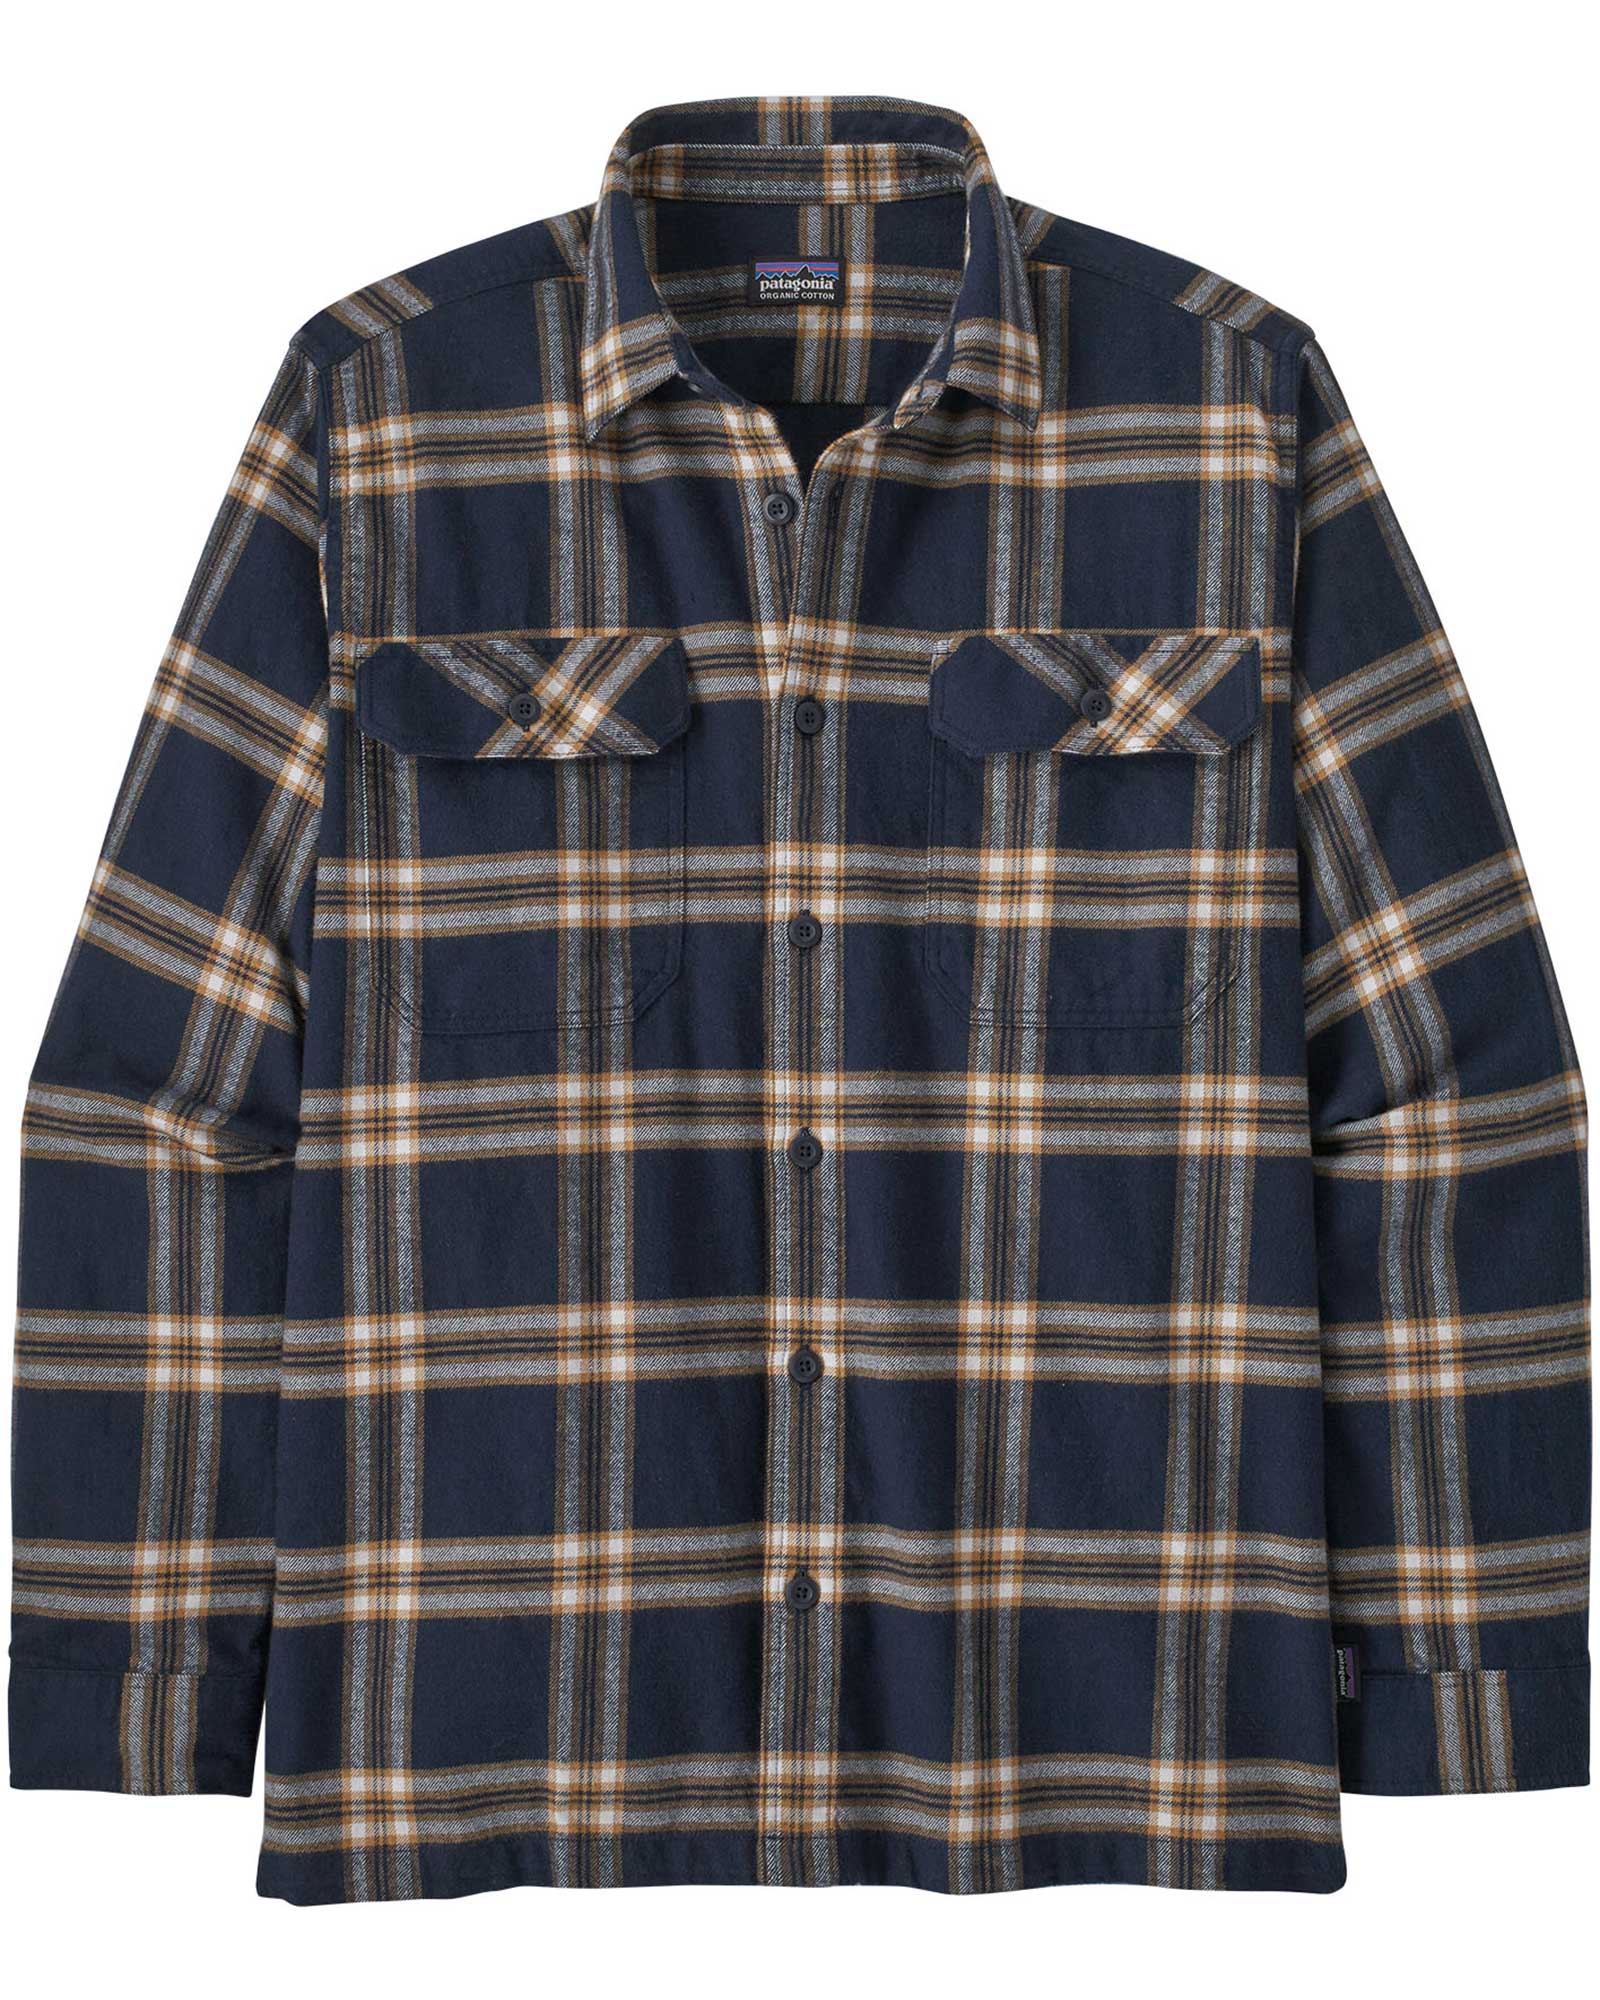 Patagonia Men’s Organic Long Sleeve Flannel Shirt - New Navy/North Line S